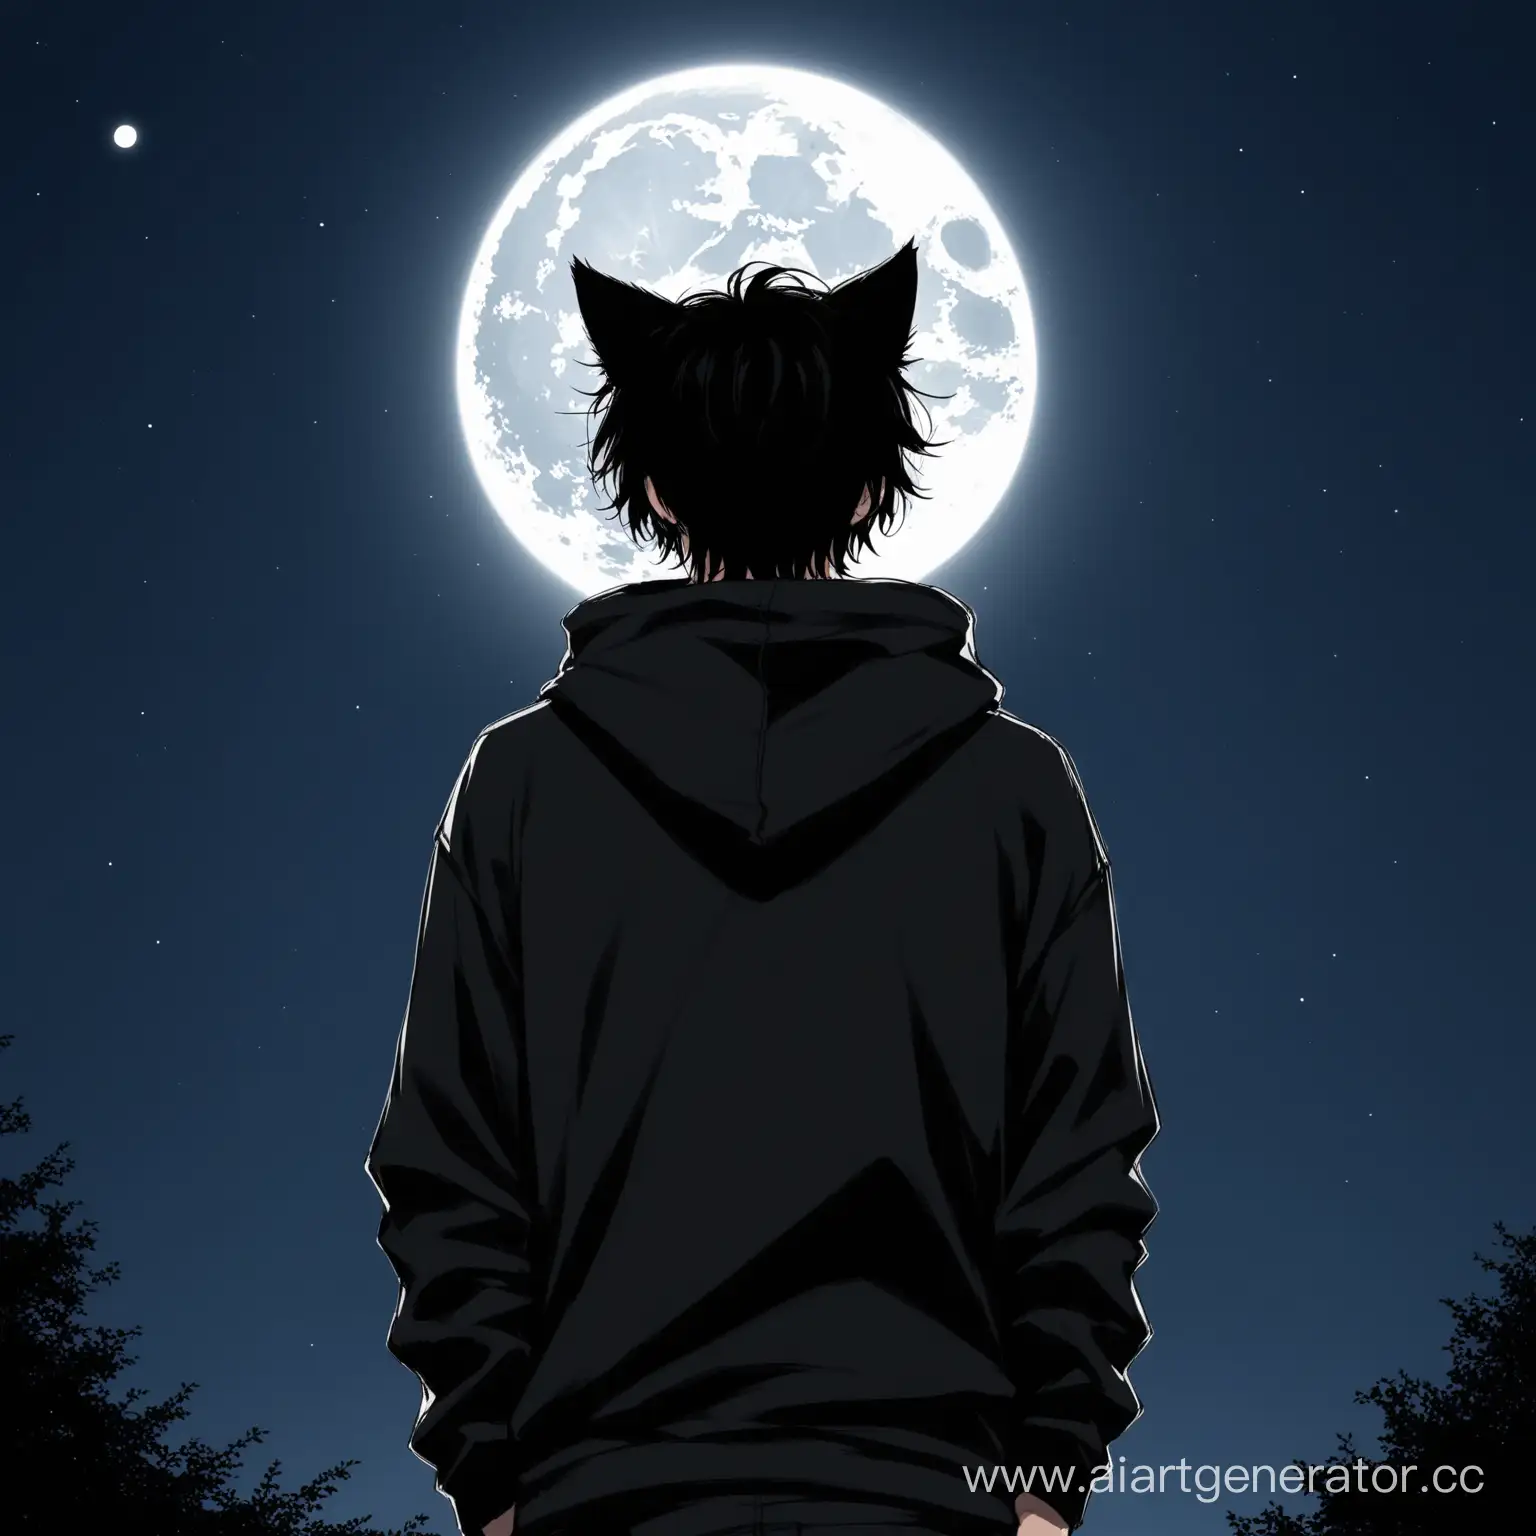 Mysterious-Man-with-Black-Cat-Ears-Contemplates-Full-Moon